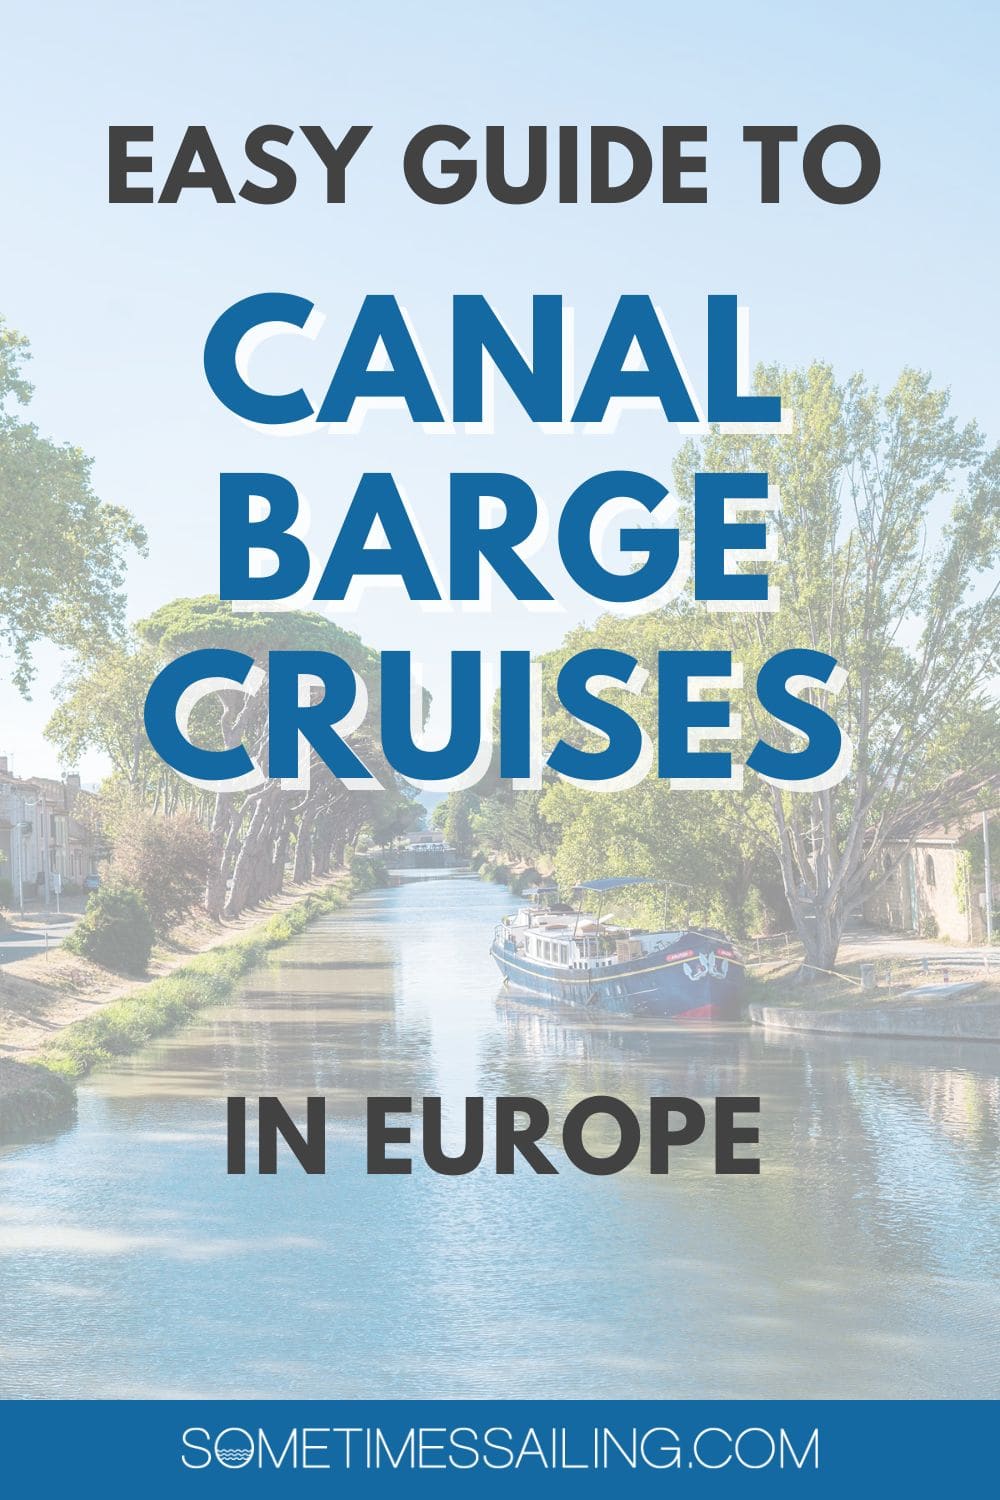 Easy Guide to Canal Barge Cruises in Europe, with a picture of the luxury barge hotel cruise ship, Anjodi, from European Waterways.